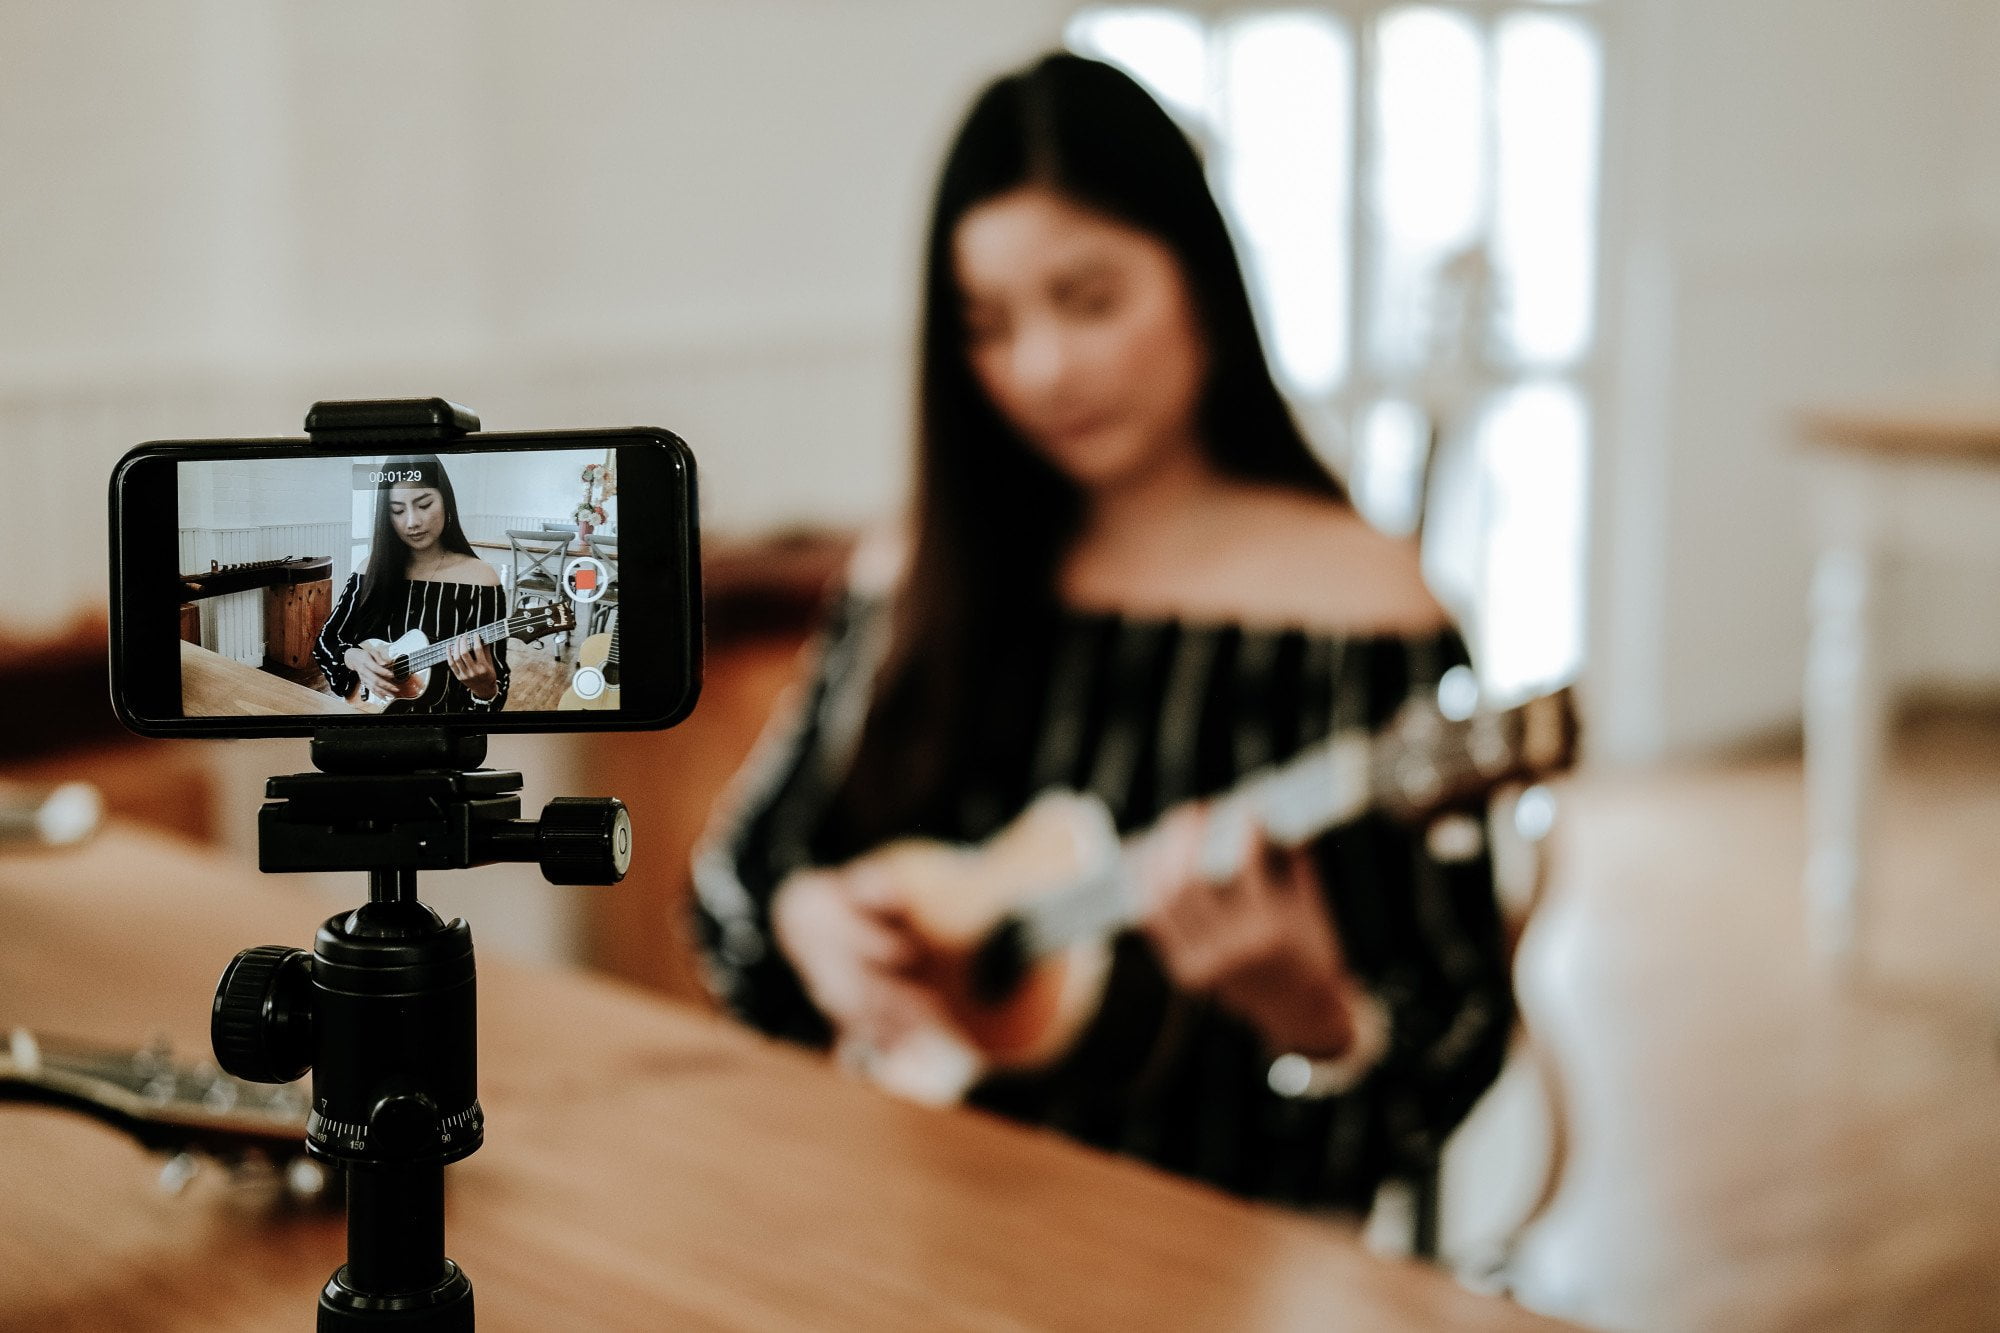 Step into the world of effective social media video production. Discover how to create social media videos that resonate with your target audience here.